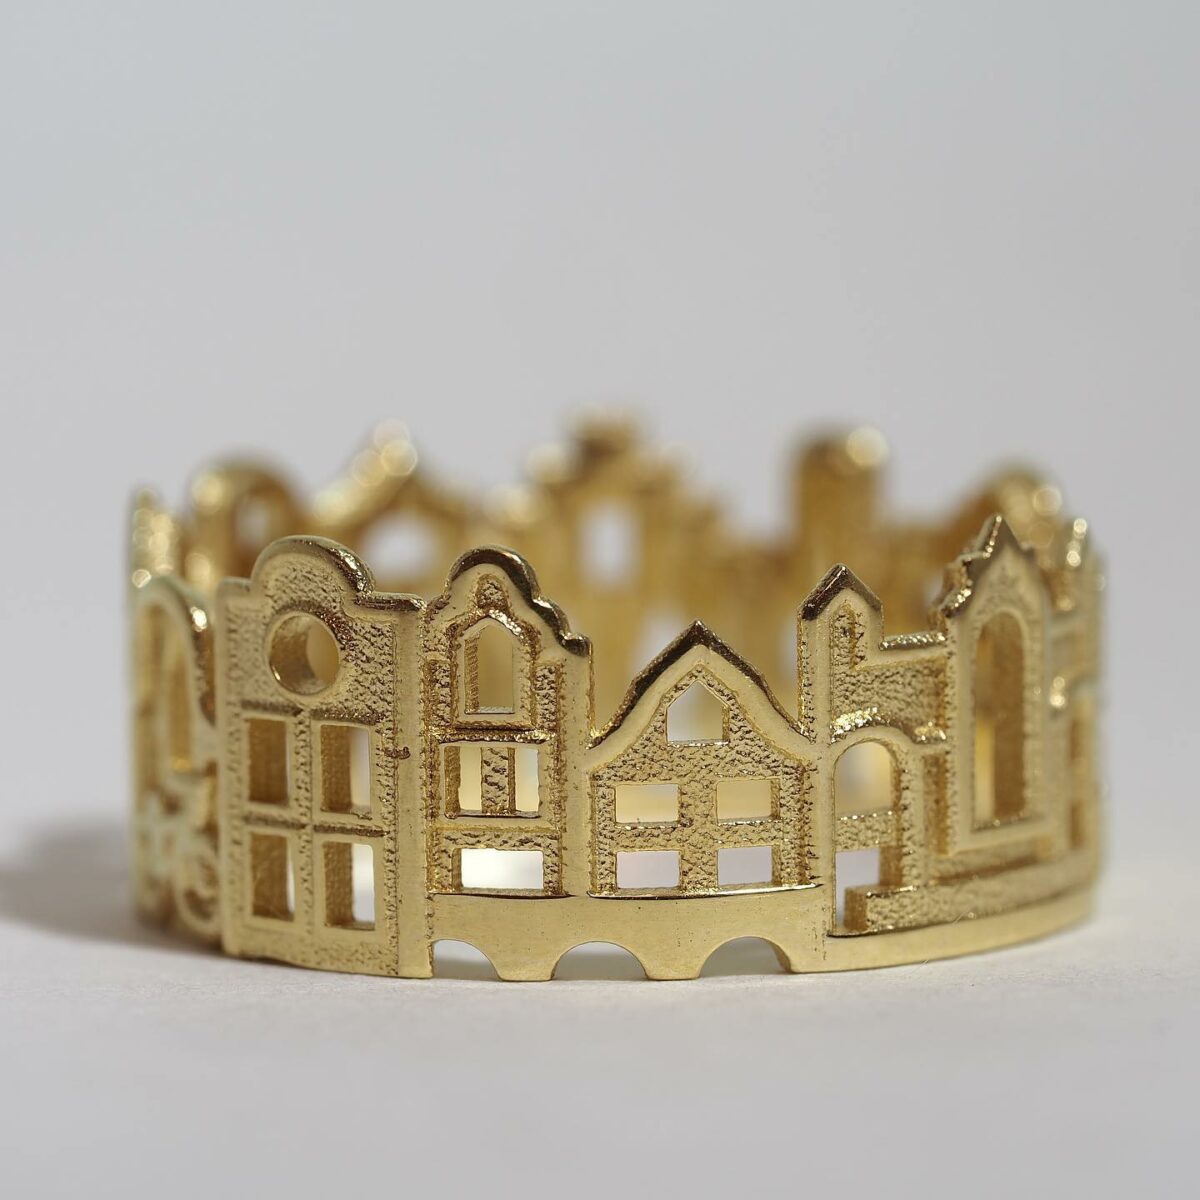 Striking Cityscape Rings In The Shape Of Skylines Of Iconic Cities By Ola Shekhtman 15